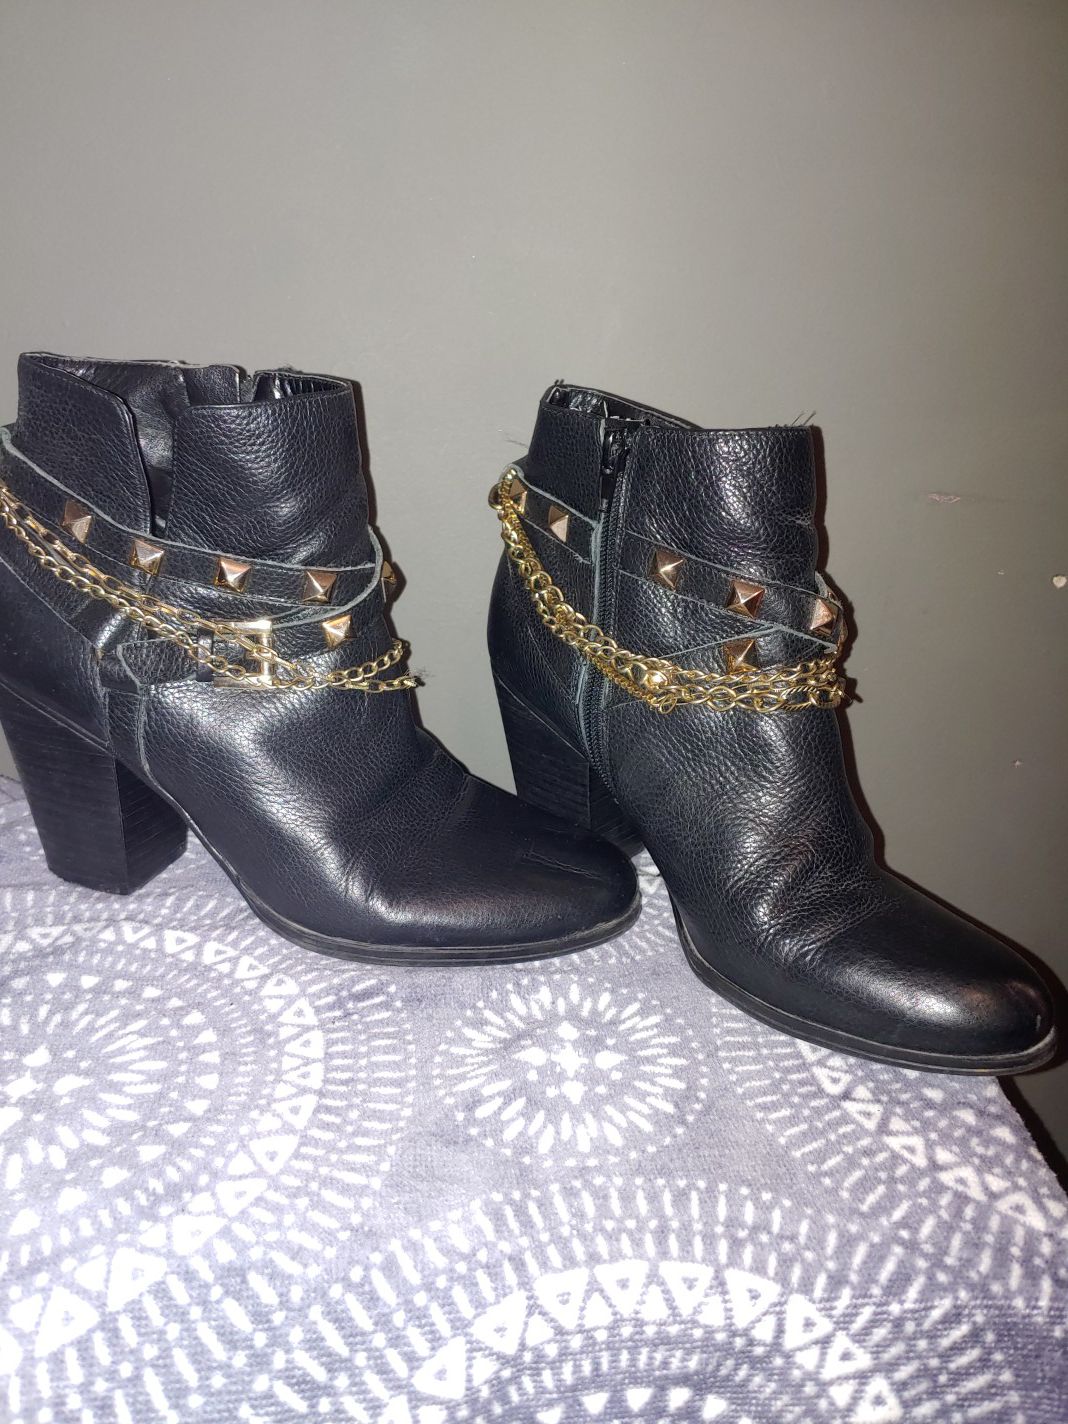 GUESS boots $$$10 Size 9 